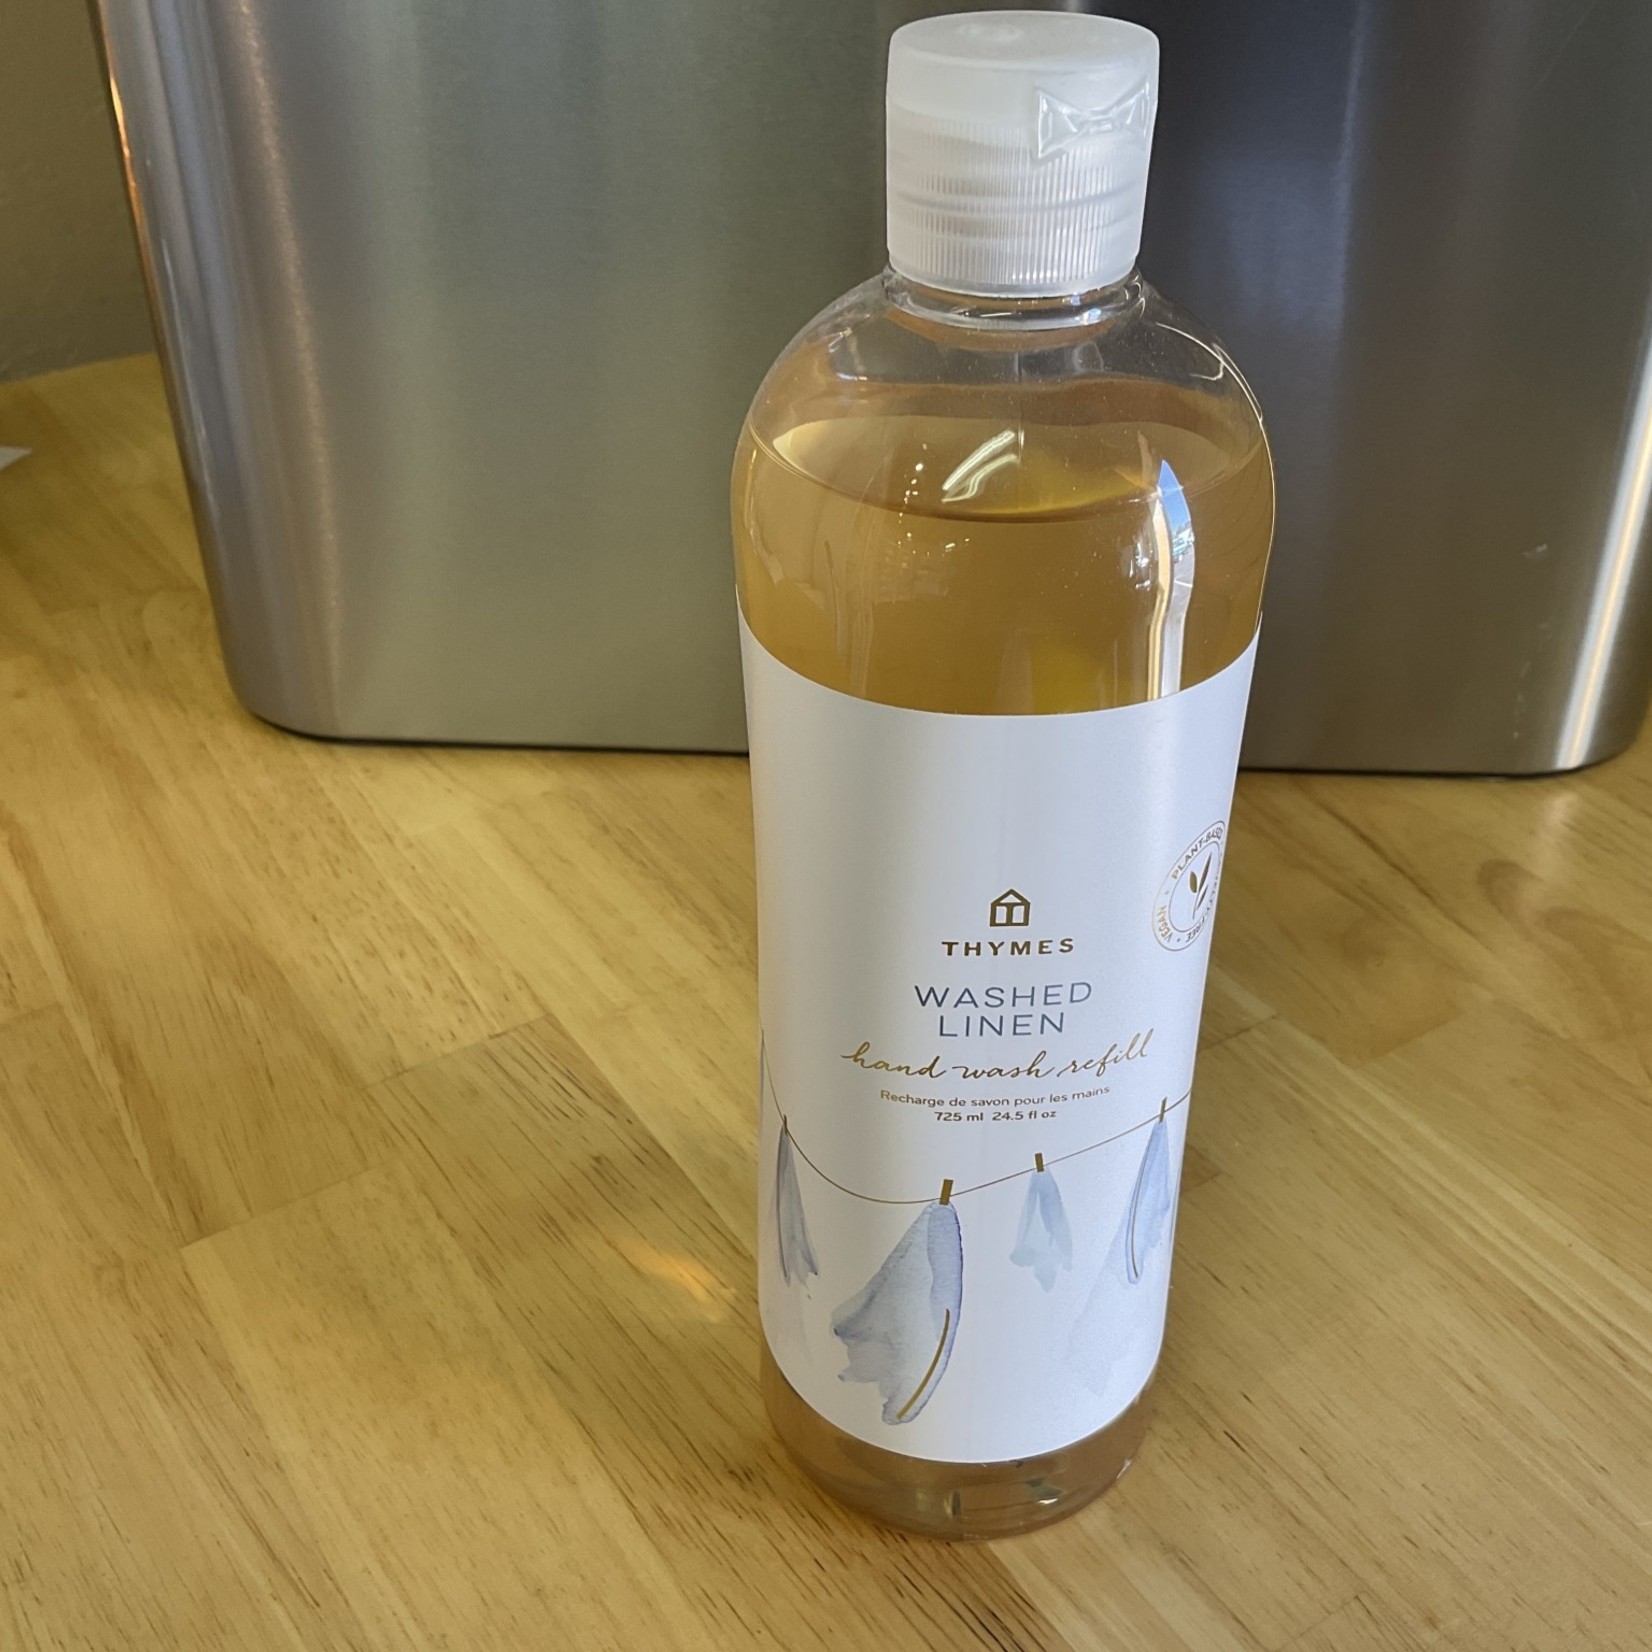 Thymes Thymes Washed linen hand wash refill 24.5 oz